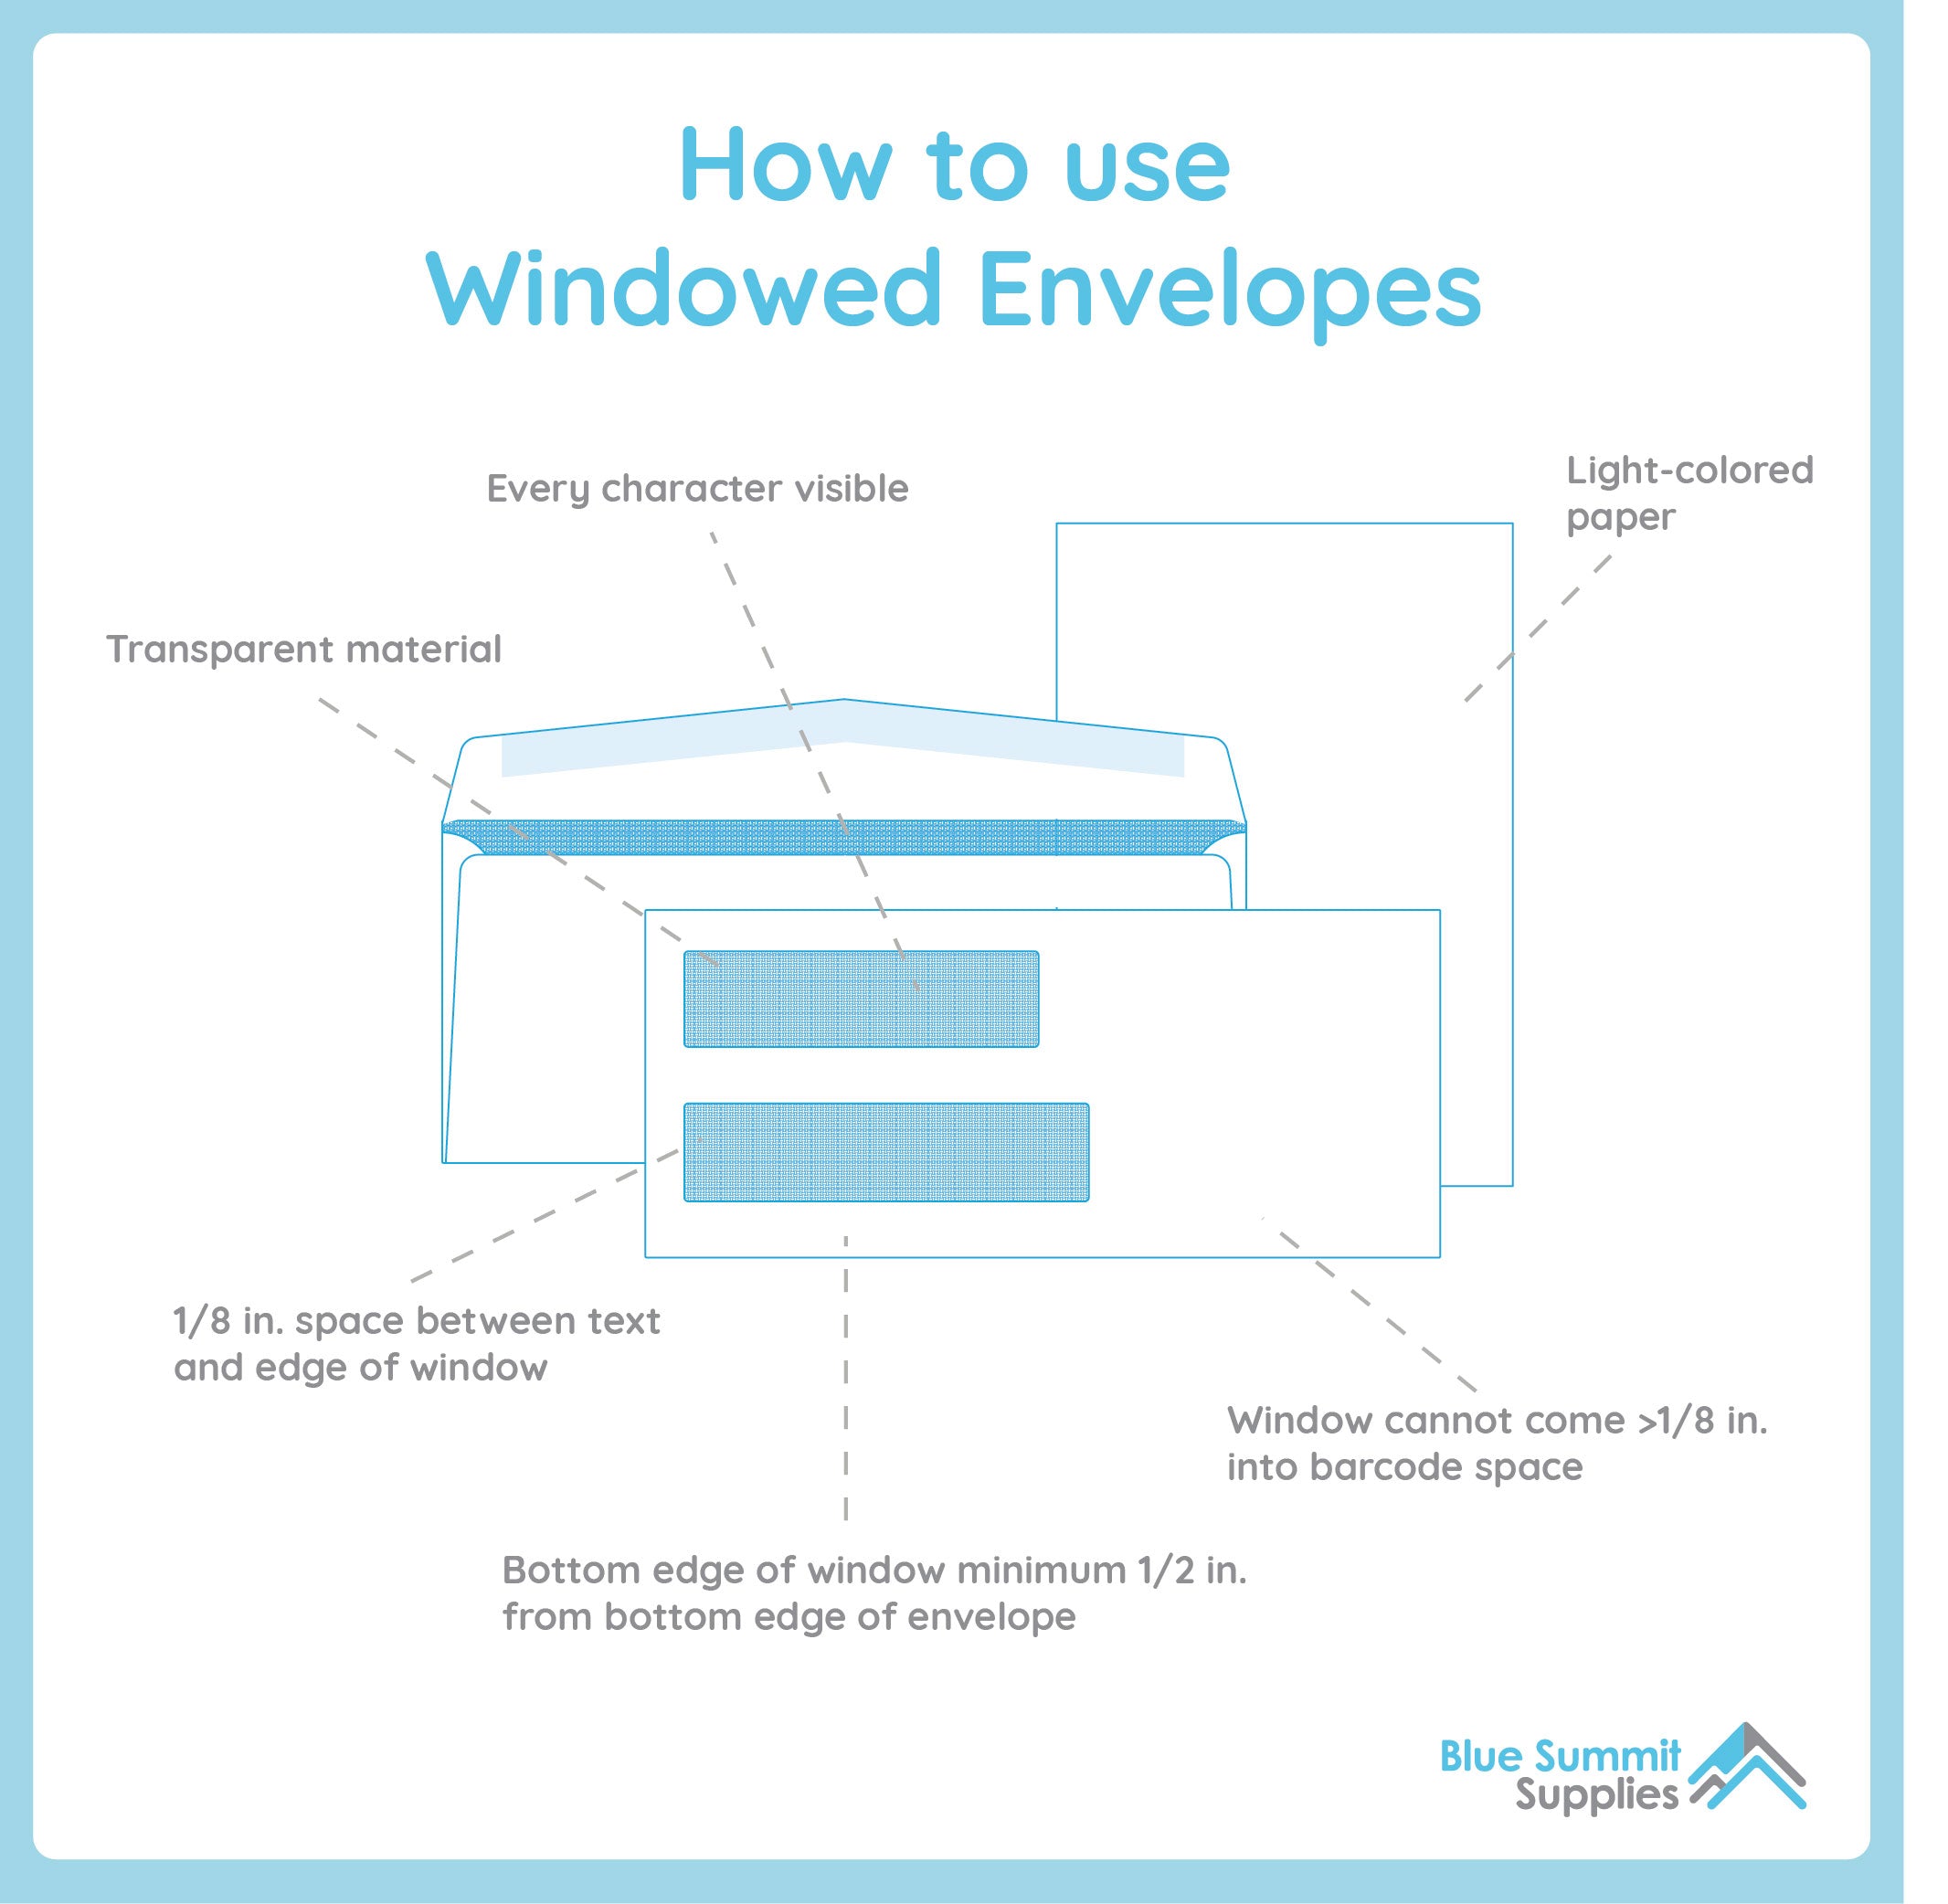 How to use a windowed envelope